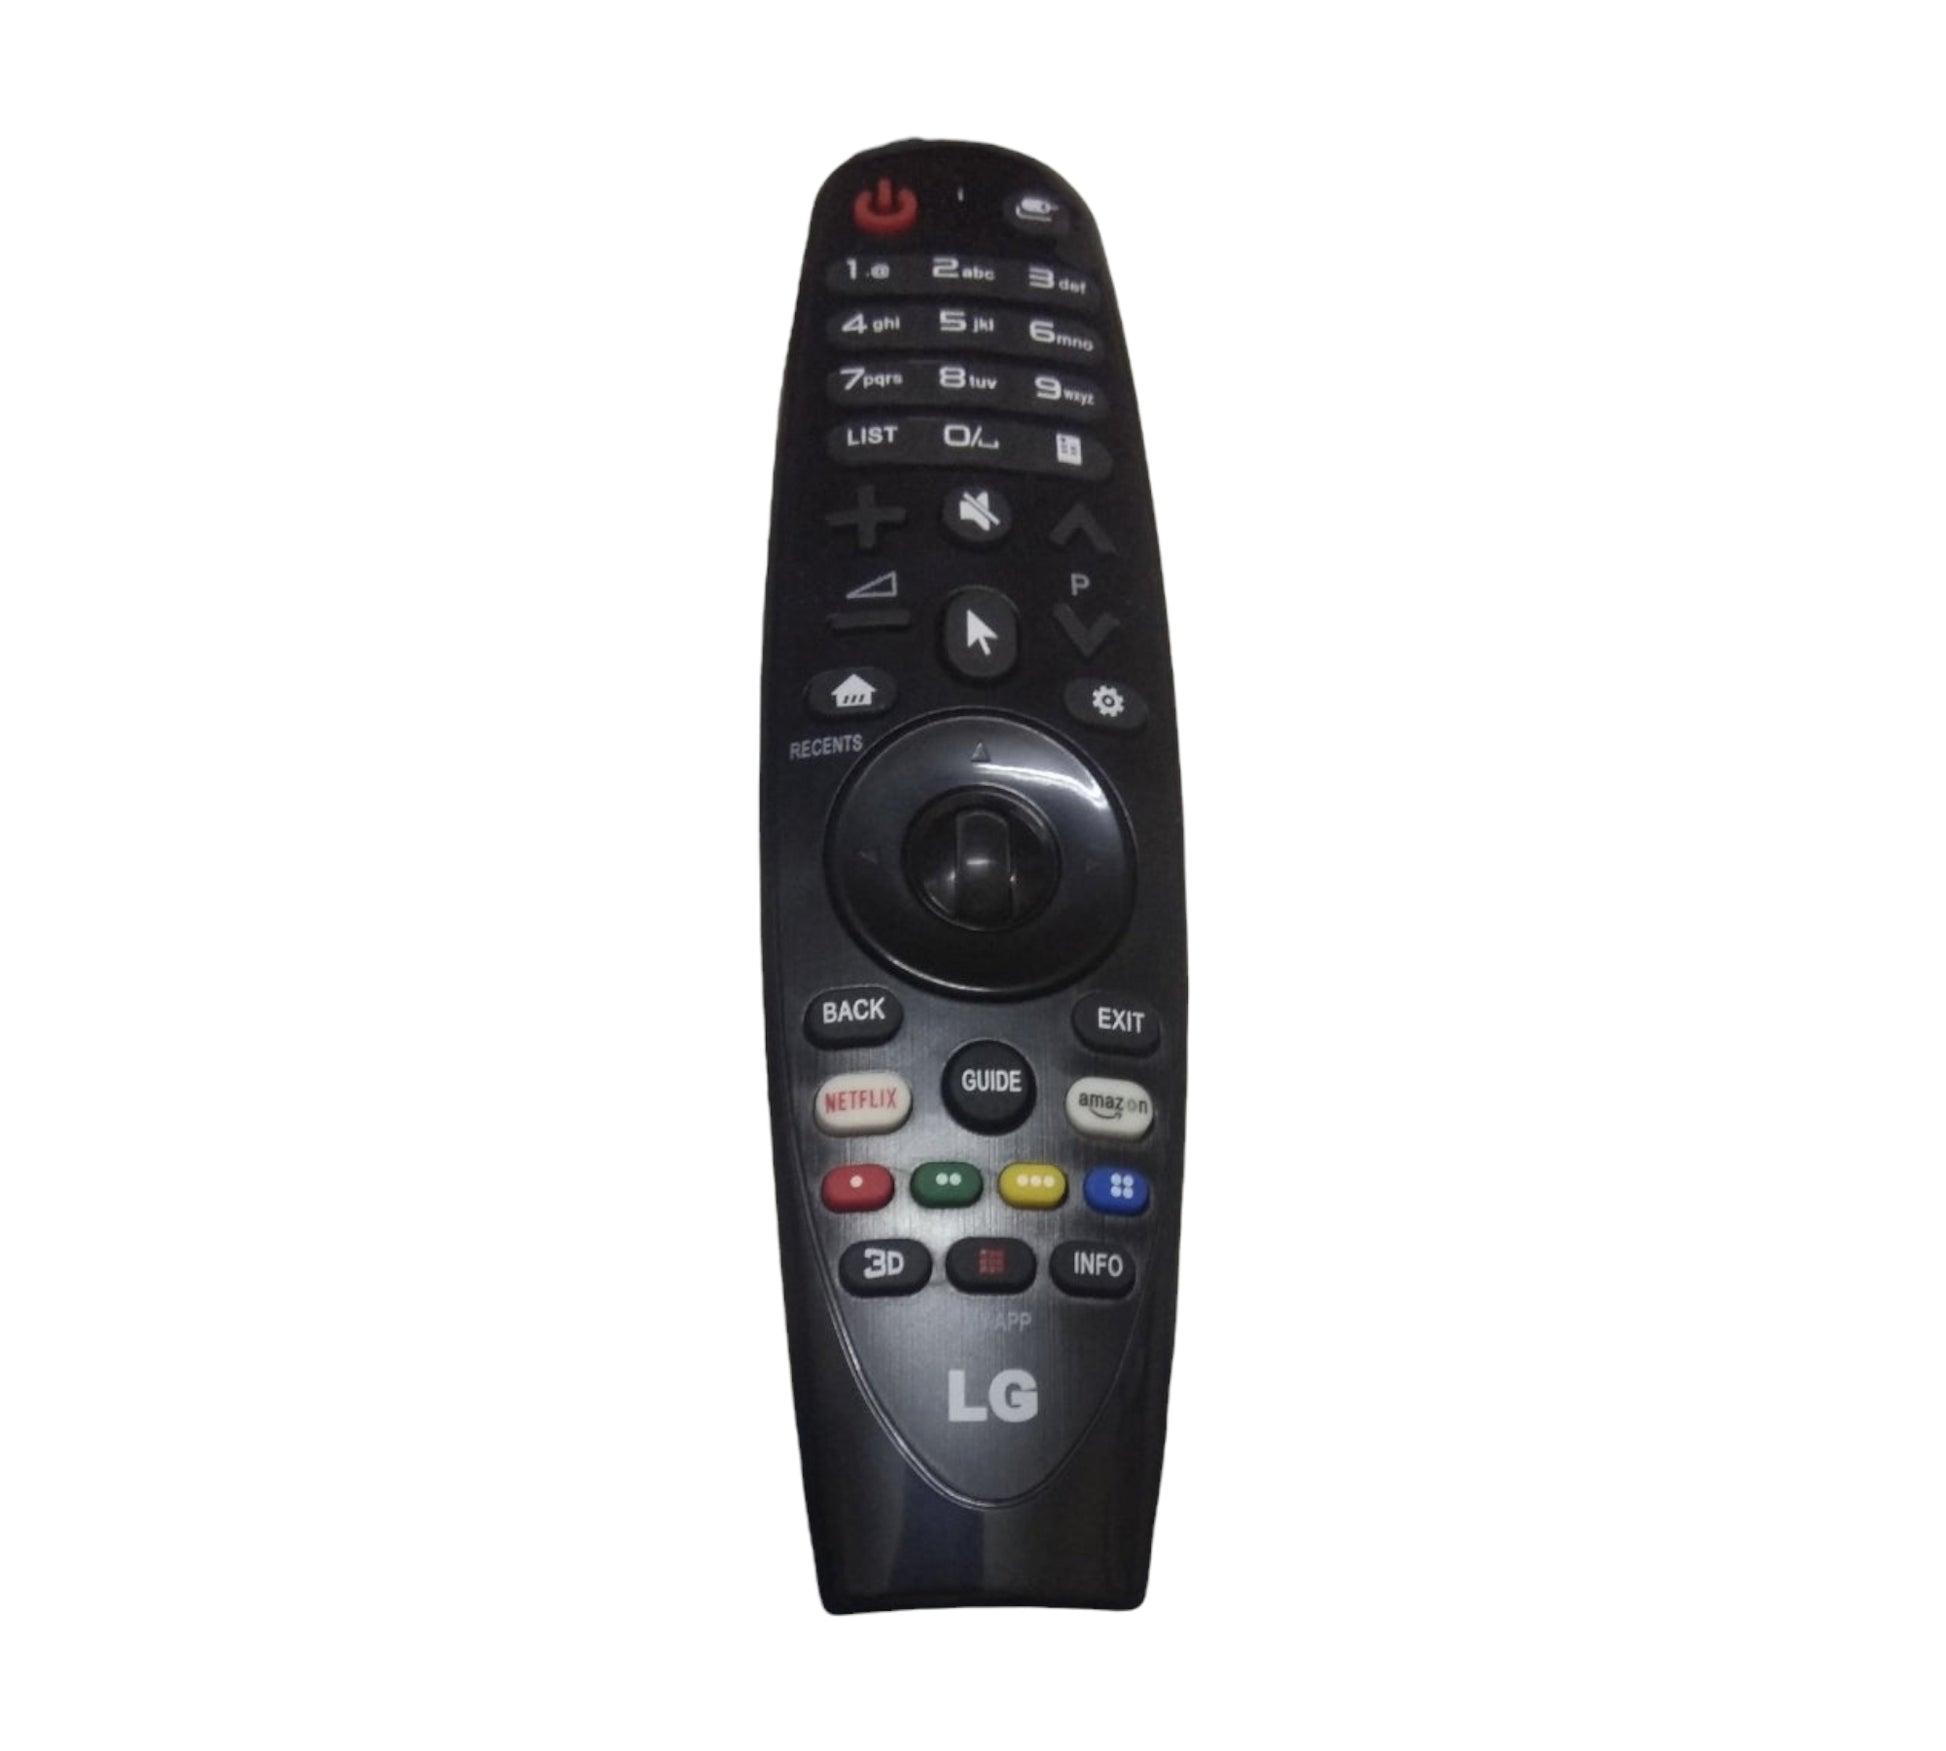 Universal  LG Smart magic remote control without voice recognition - Faritha